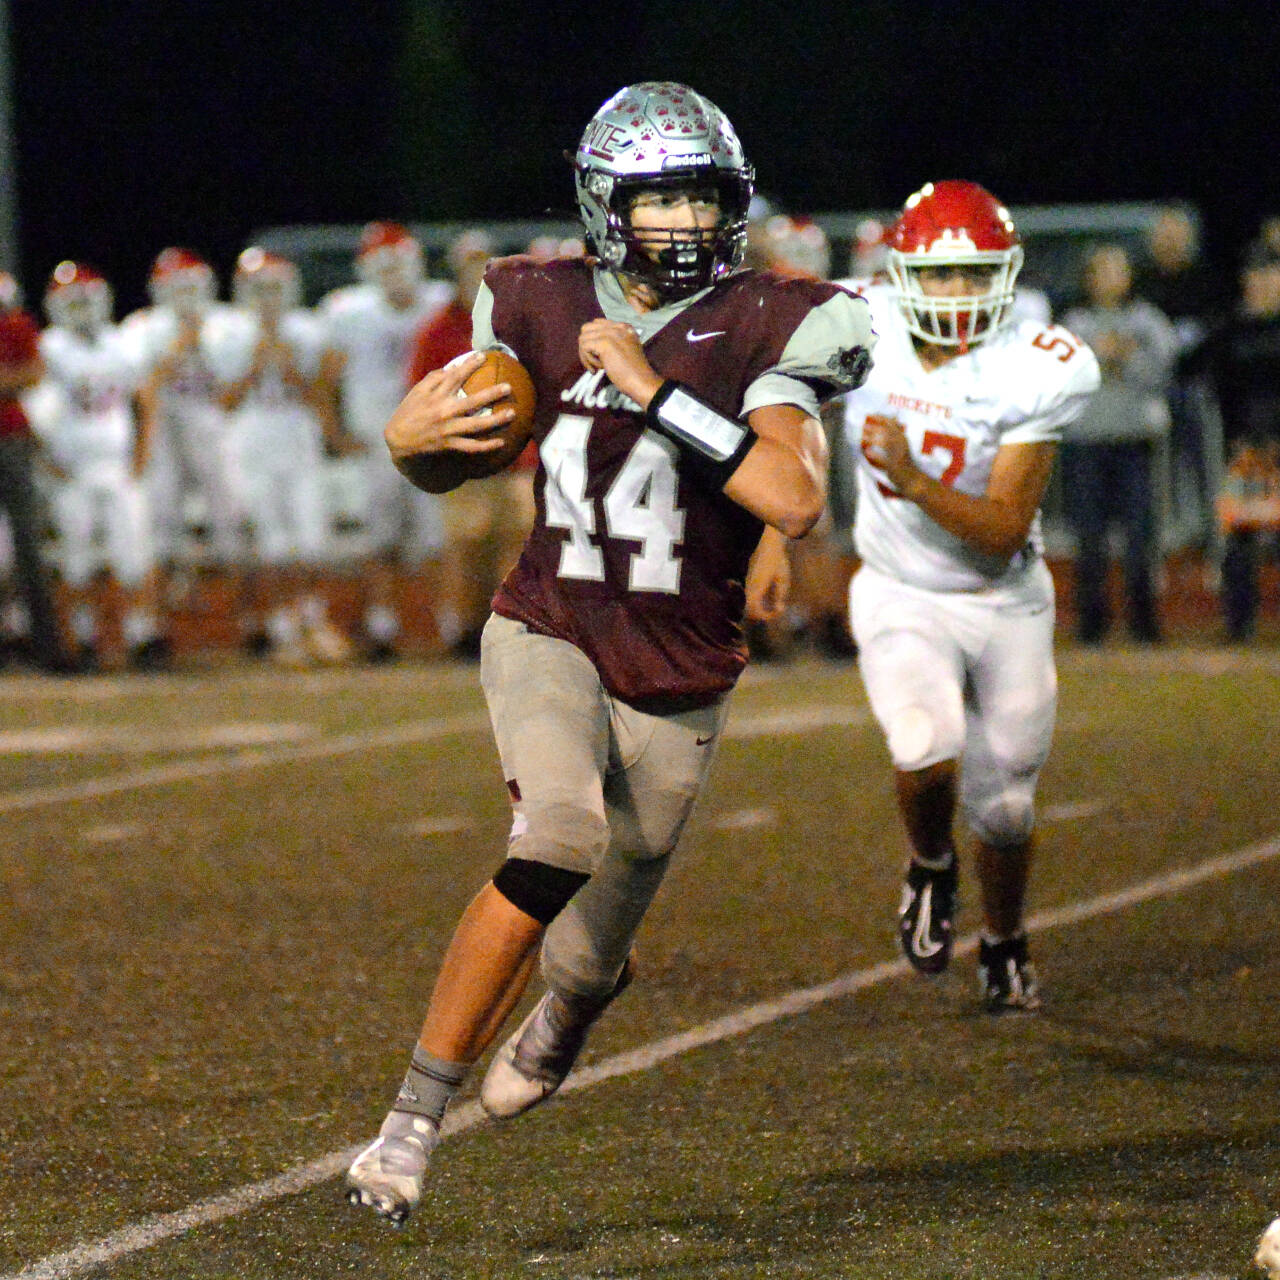 DAILY WORLD FILE PHOTO 
Montesano running back Gabe Bodwell (44) and the Bulldogs have a league matchup against No. 10 Tenino on Friday in Montesano. If Montesano wins its final two regular-season games, the Bulldogs will reclaim their throne atop the 1A Evergreen League.